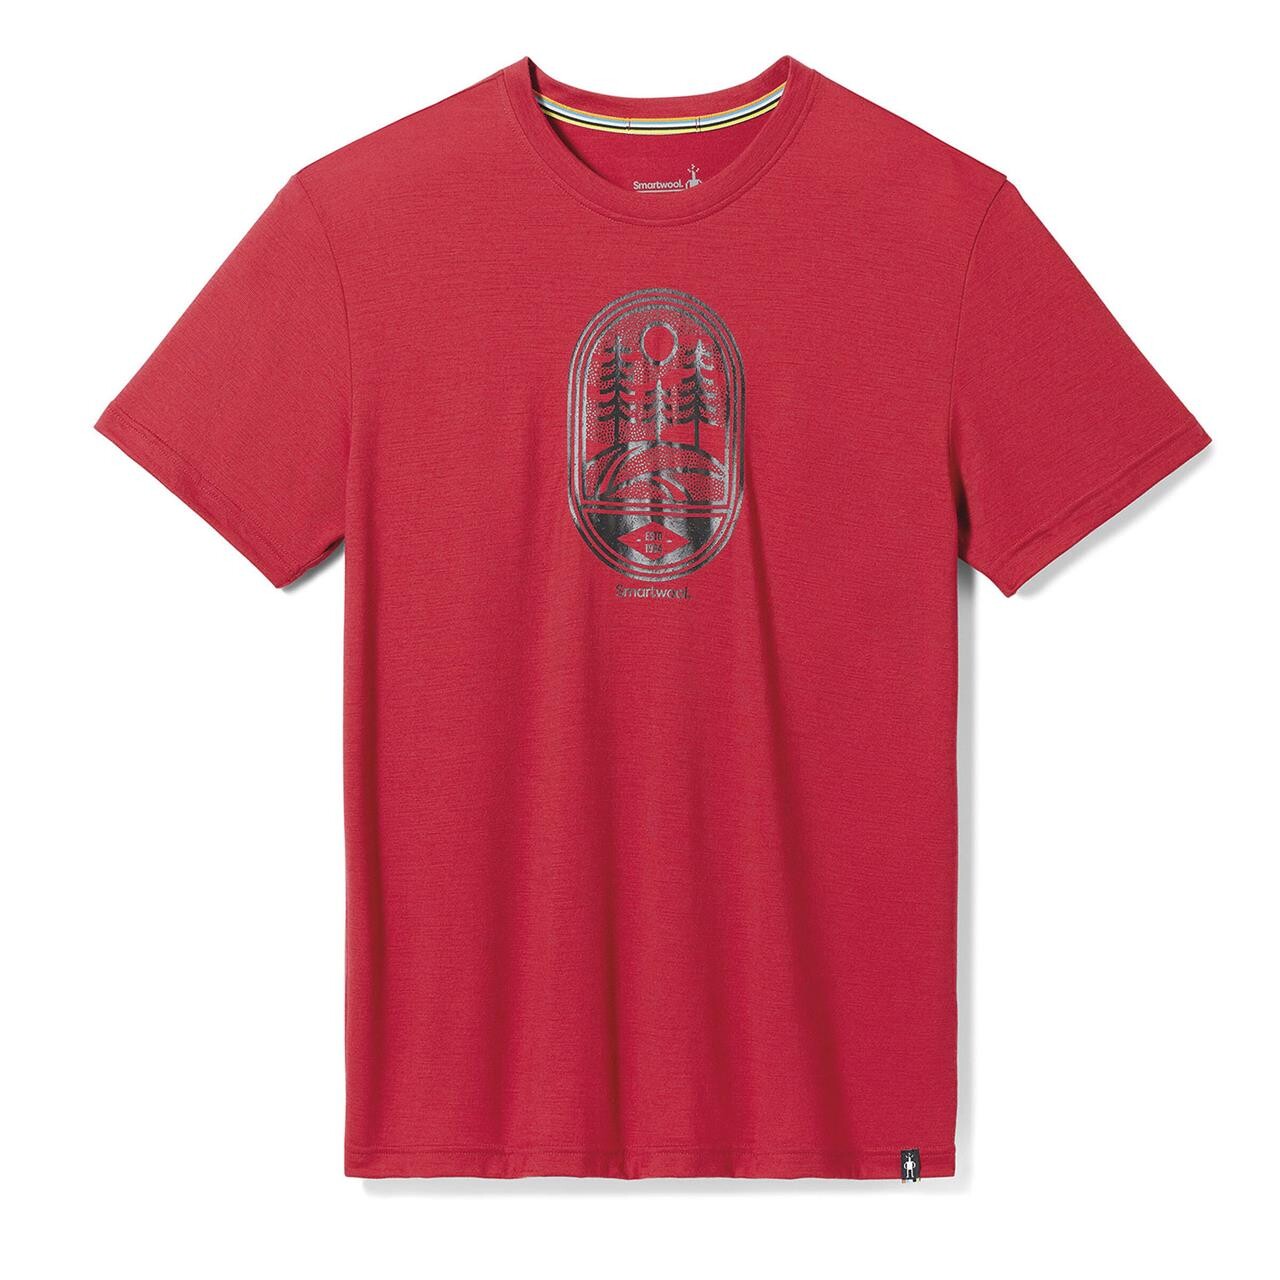 Se Smartwool Mountain Trail Graphic S/S Tee Slim Fit (Rød (RHYTHMIC RED) Small) hos Friluftsland.dk